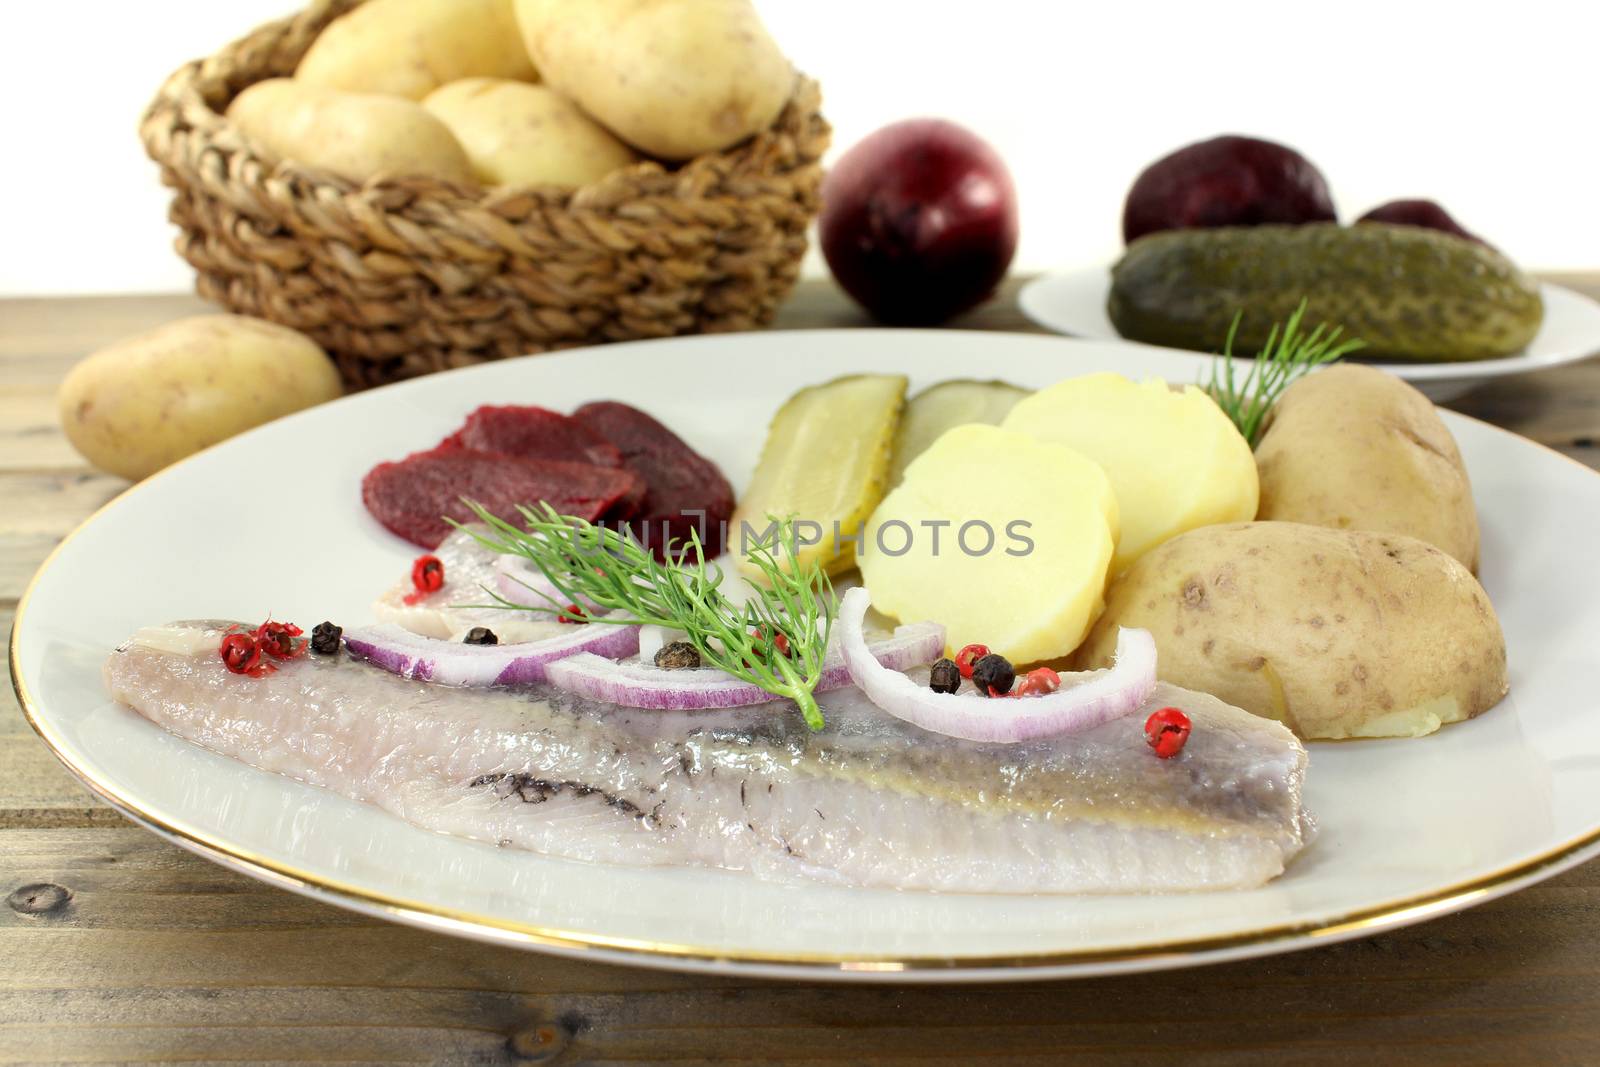 Young herring fillet by silencefoto